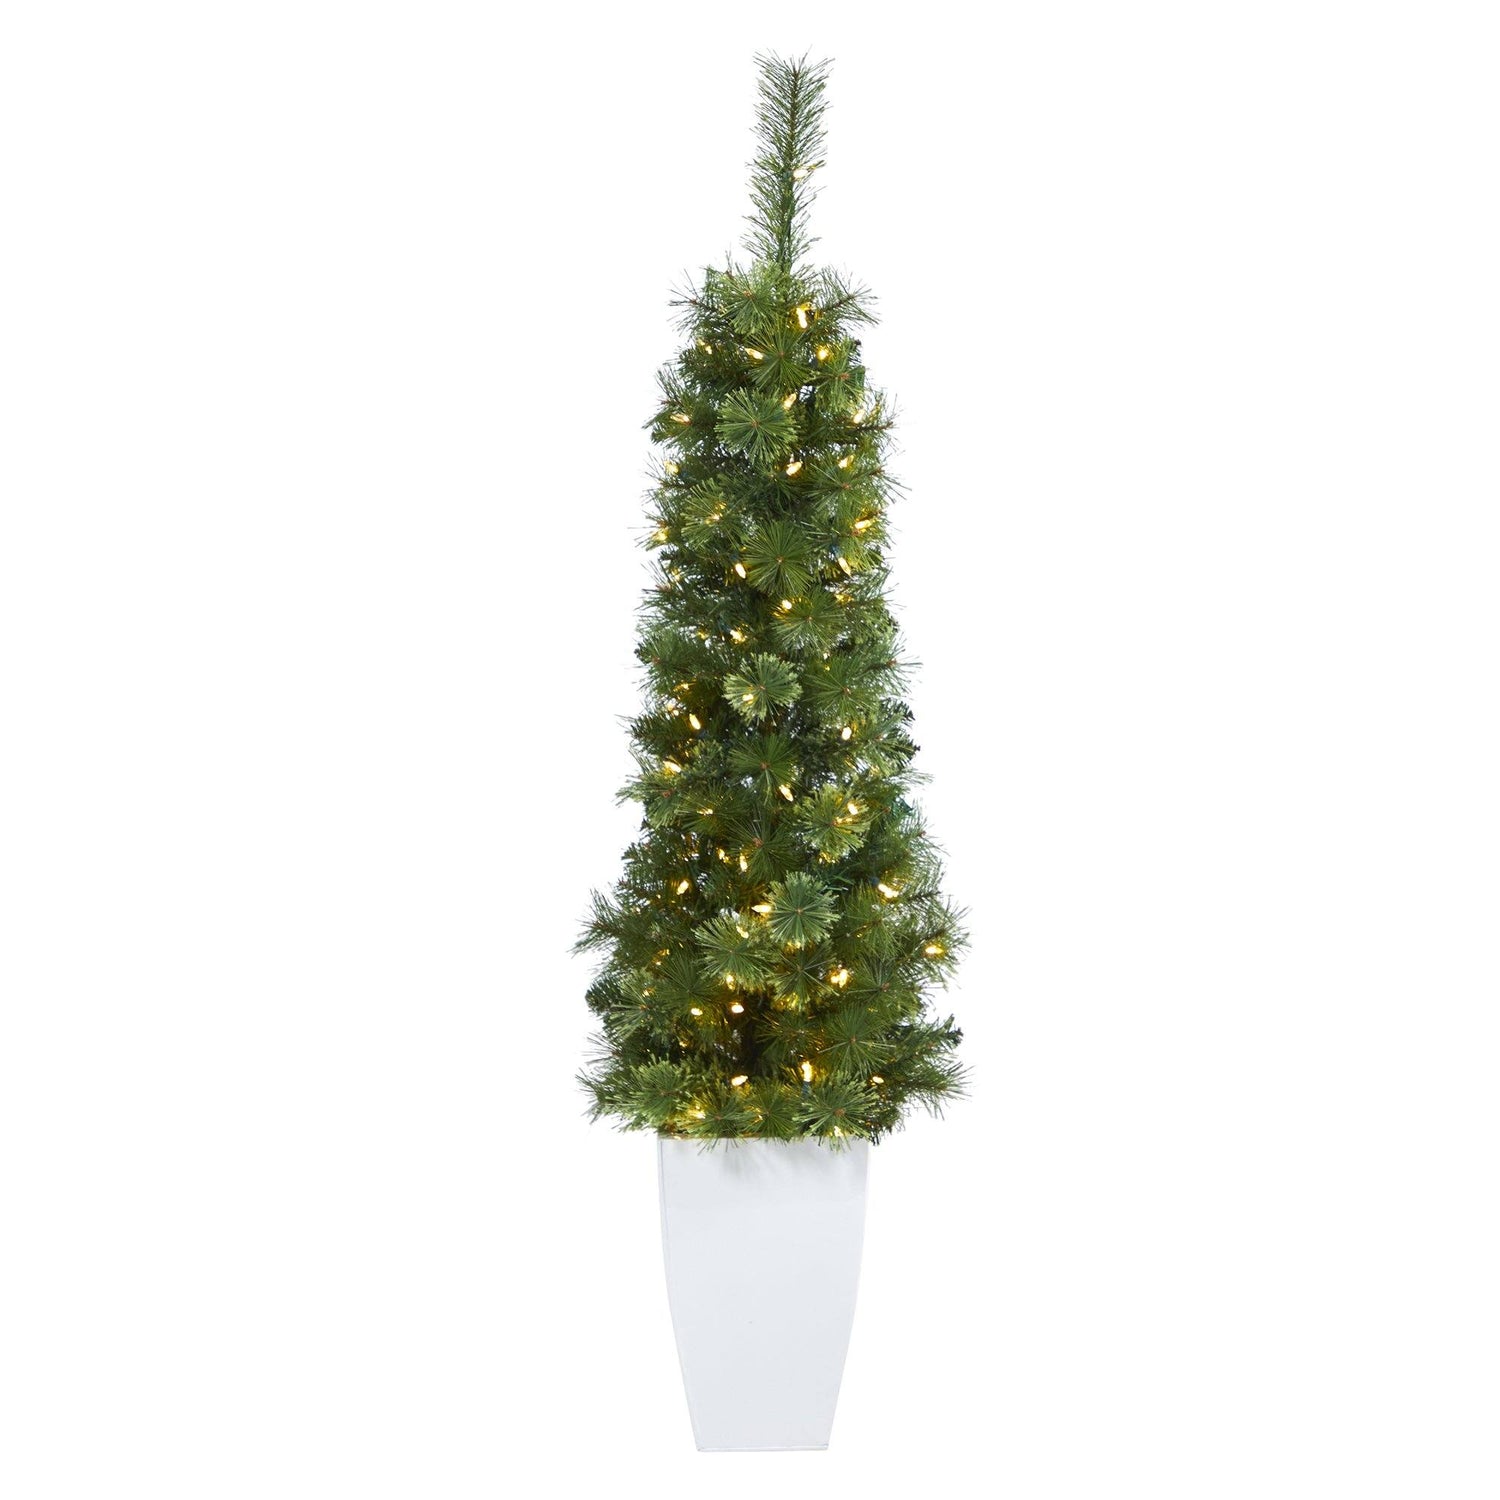 50” Green Pencil Artificial Christmas Tree with 100 Clear (Multifunction) LED Lights and 140 Bendable Branches in White Metal Planter